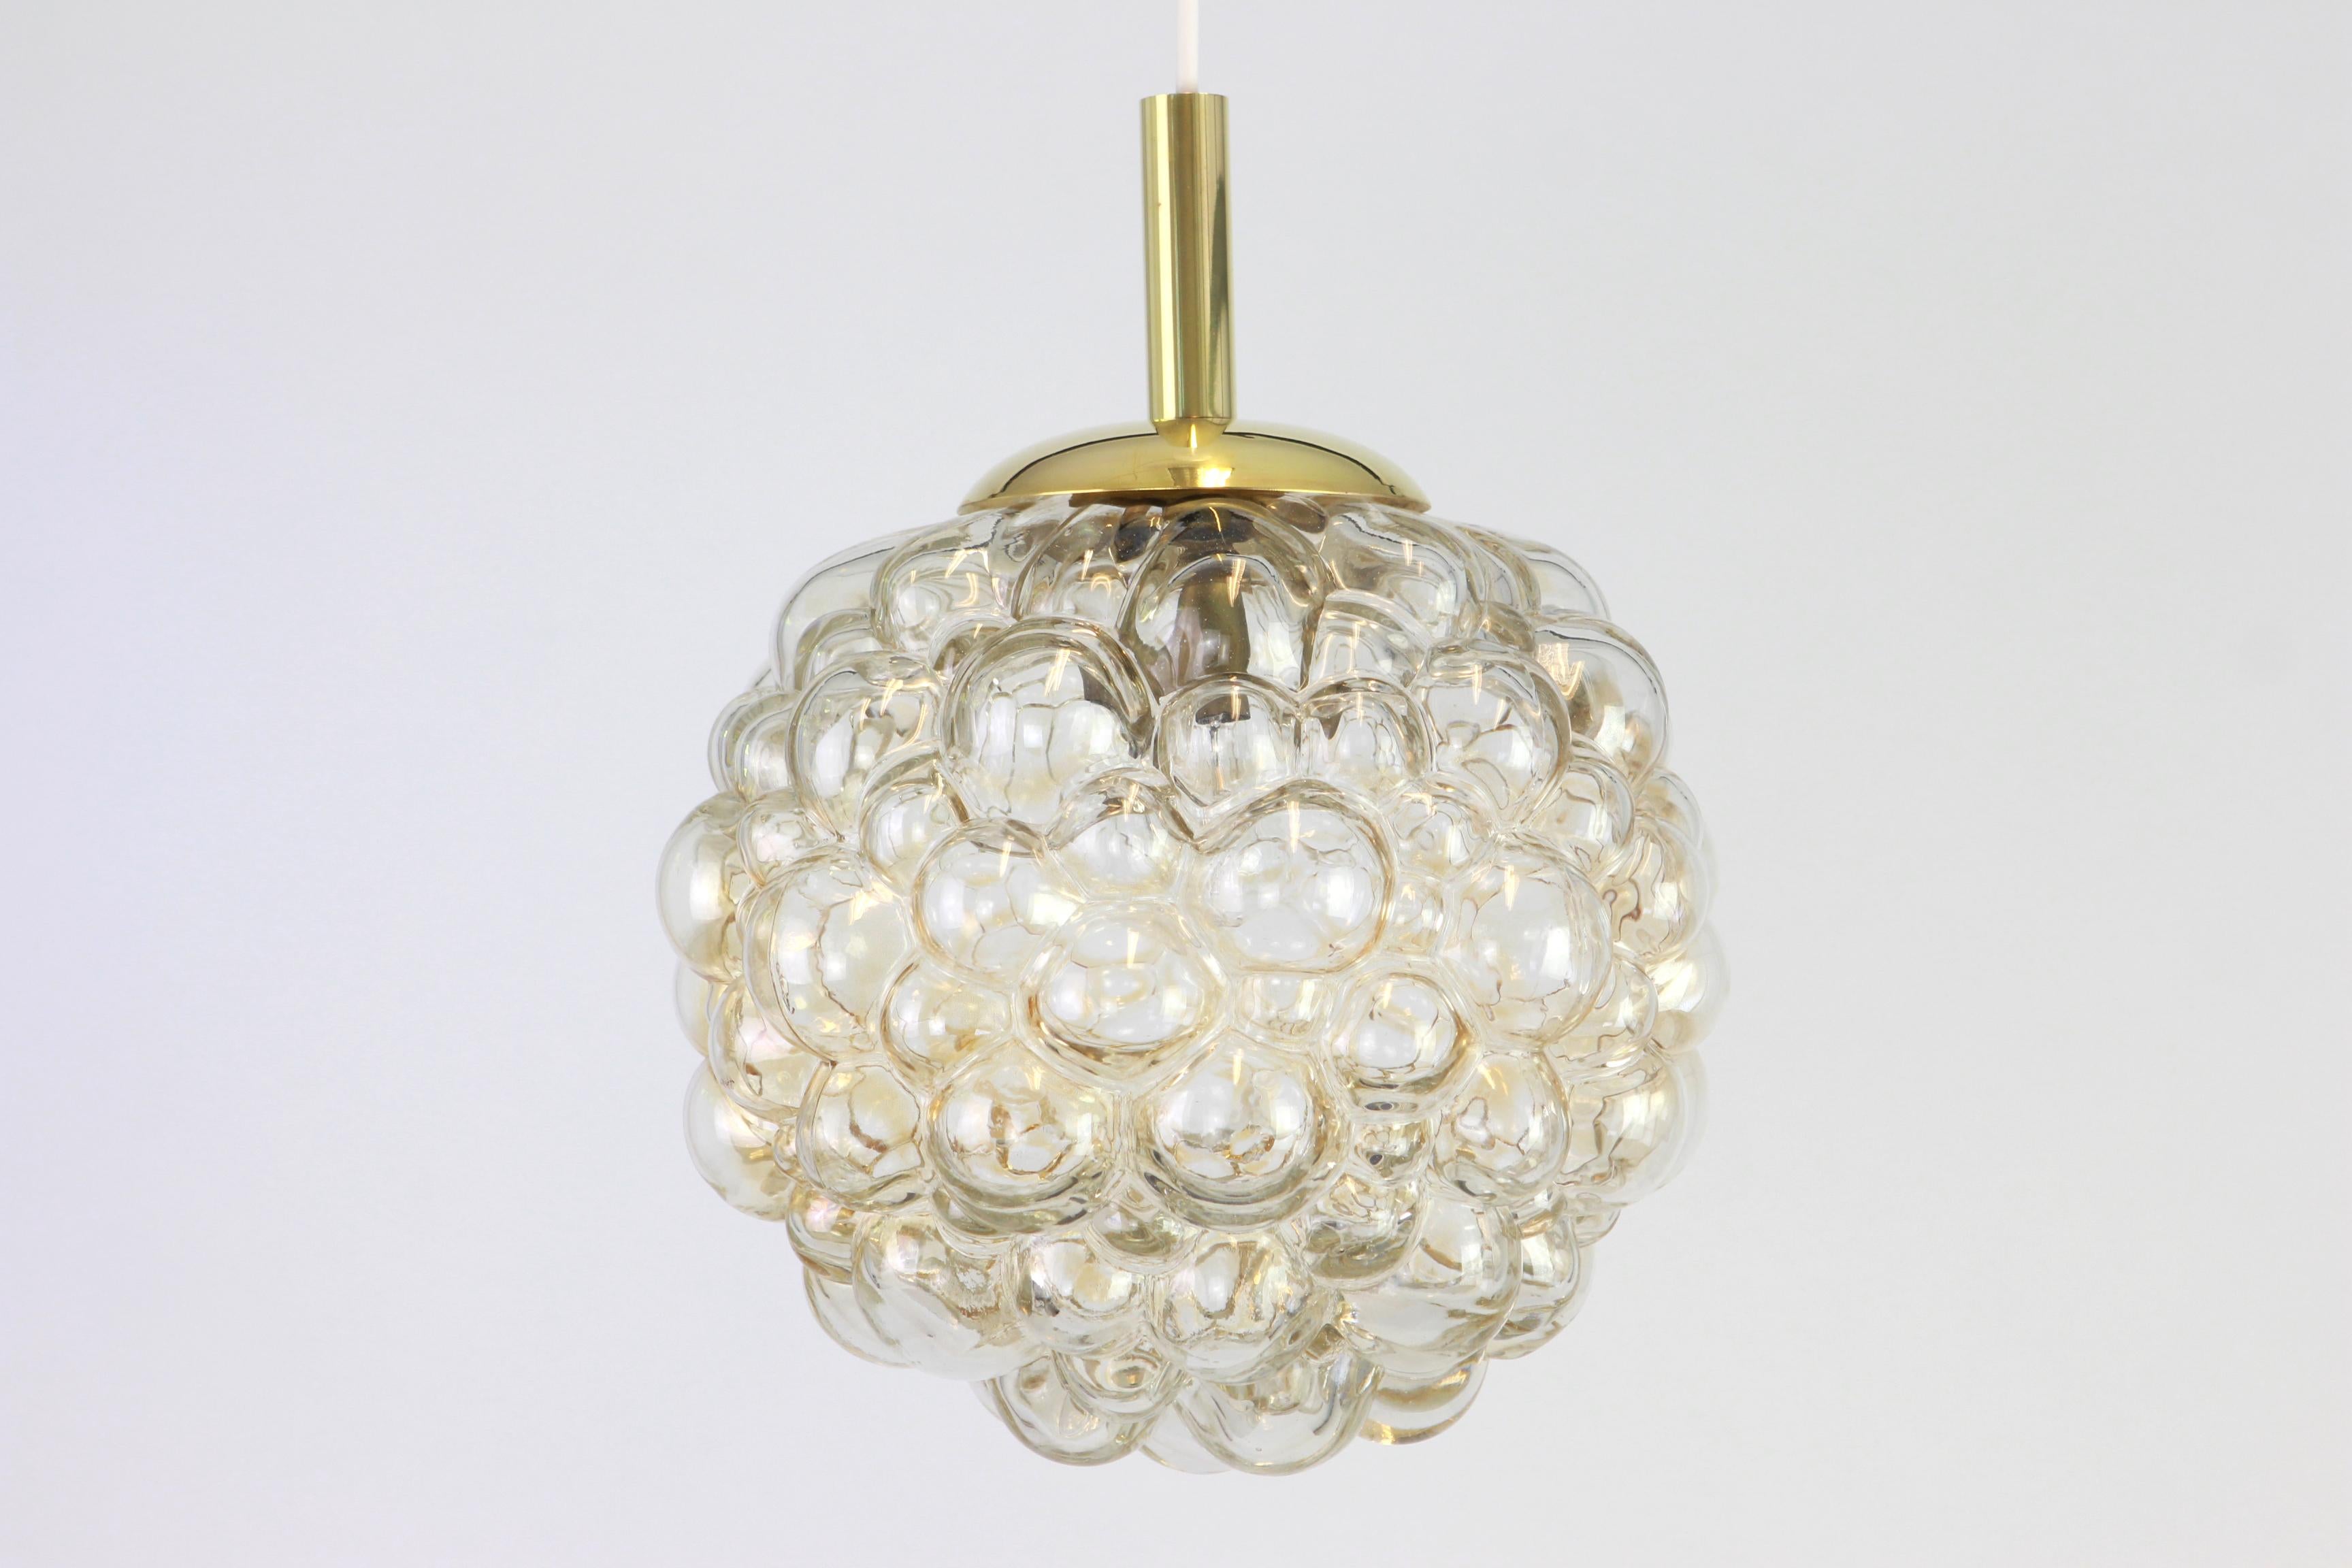 Set of 3  large round with lights smoke tone bubble glass pendant designed by Helena Tynell for Limburg, manufactured in Germany, circa 1970s

Sockets: Each needs 1 x E27 standard bulb.
Measure: Diameter 30 cm // 12 inches
Height (adjustable) 80 cm